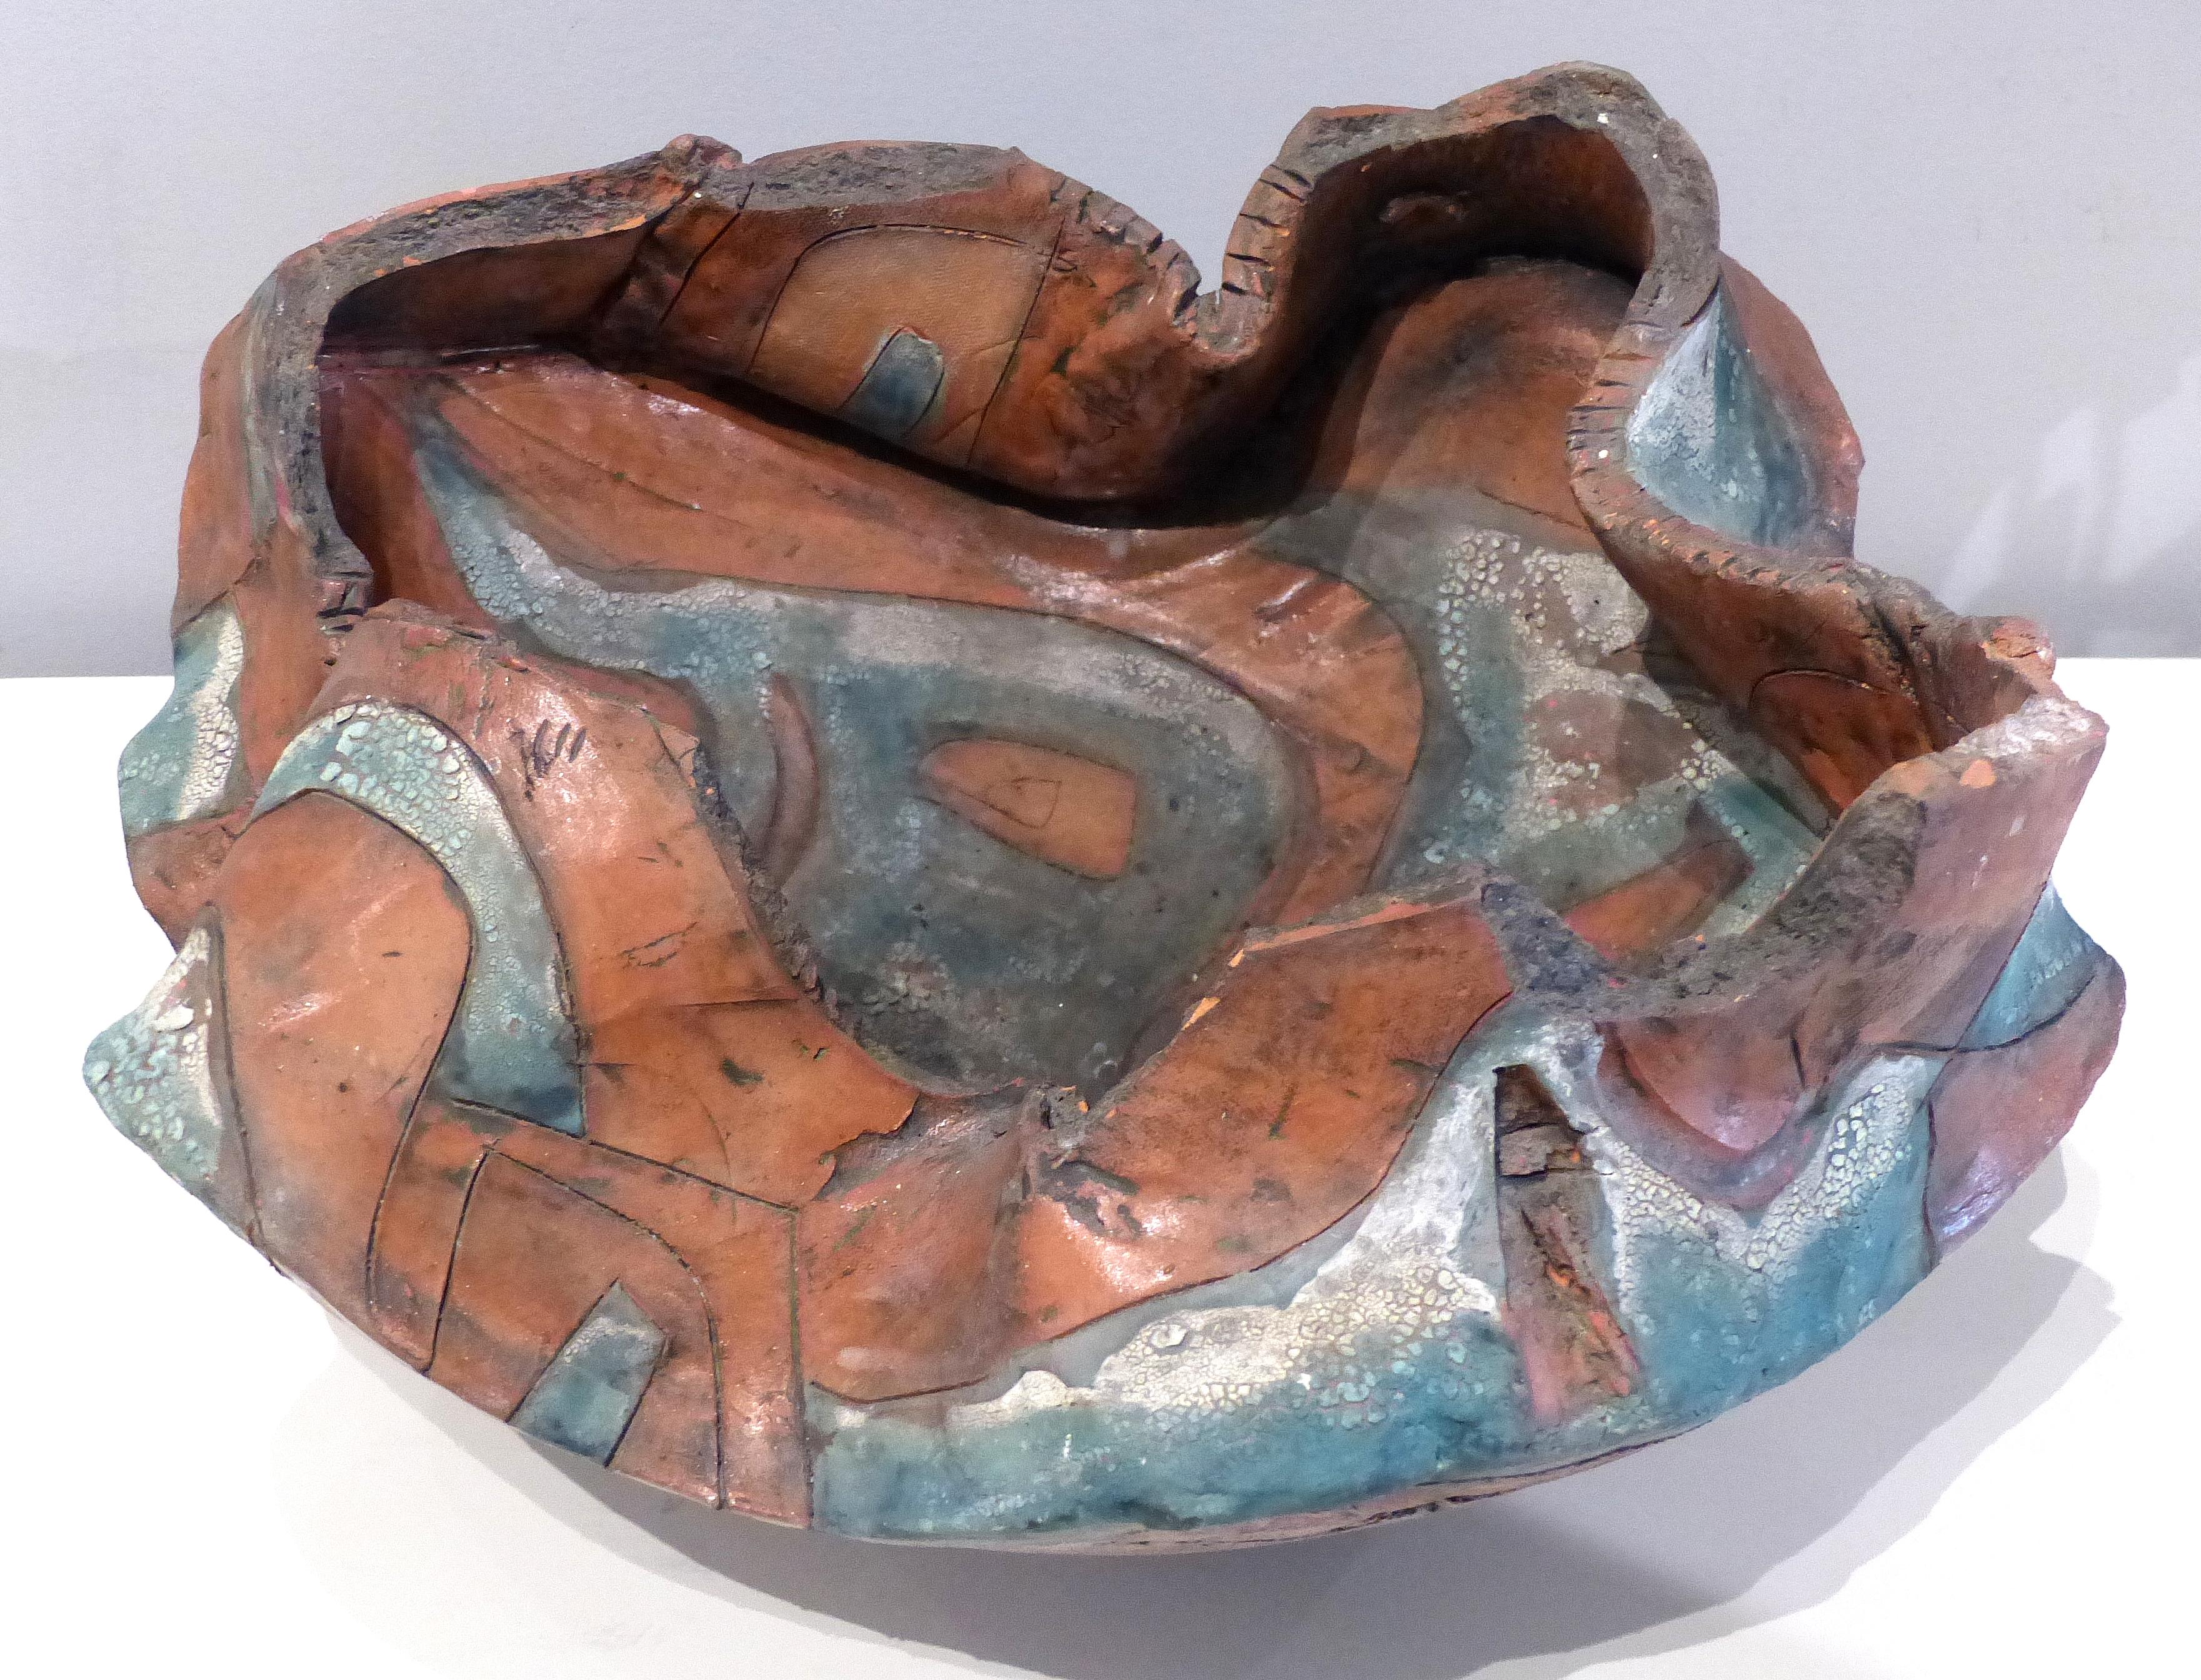 Brutalist Biomorphic Ceramic Pottery Vessel Sculpture, Hand-Built

Offered for sale is a large stunning Brutalist Studio Pottery vessel form sculpture. This biomorphic shaped sculpture has great textures, movement and rich colors. The work is signed